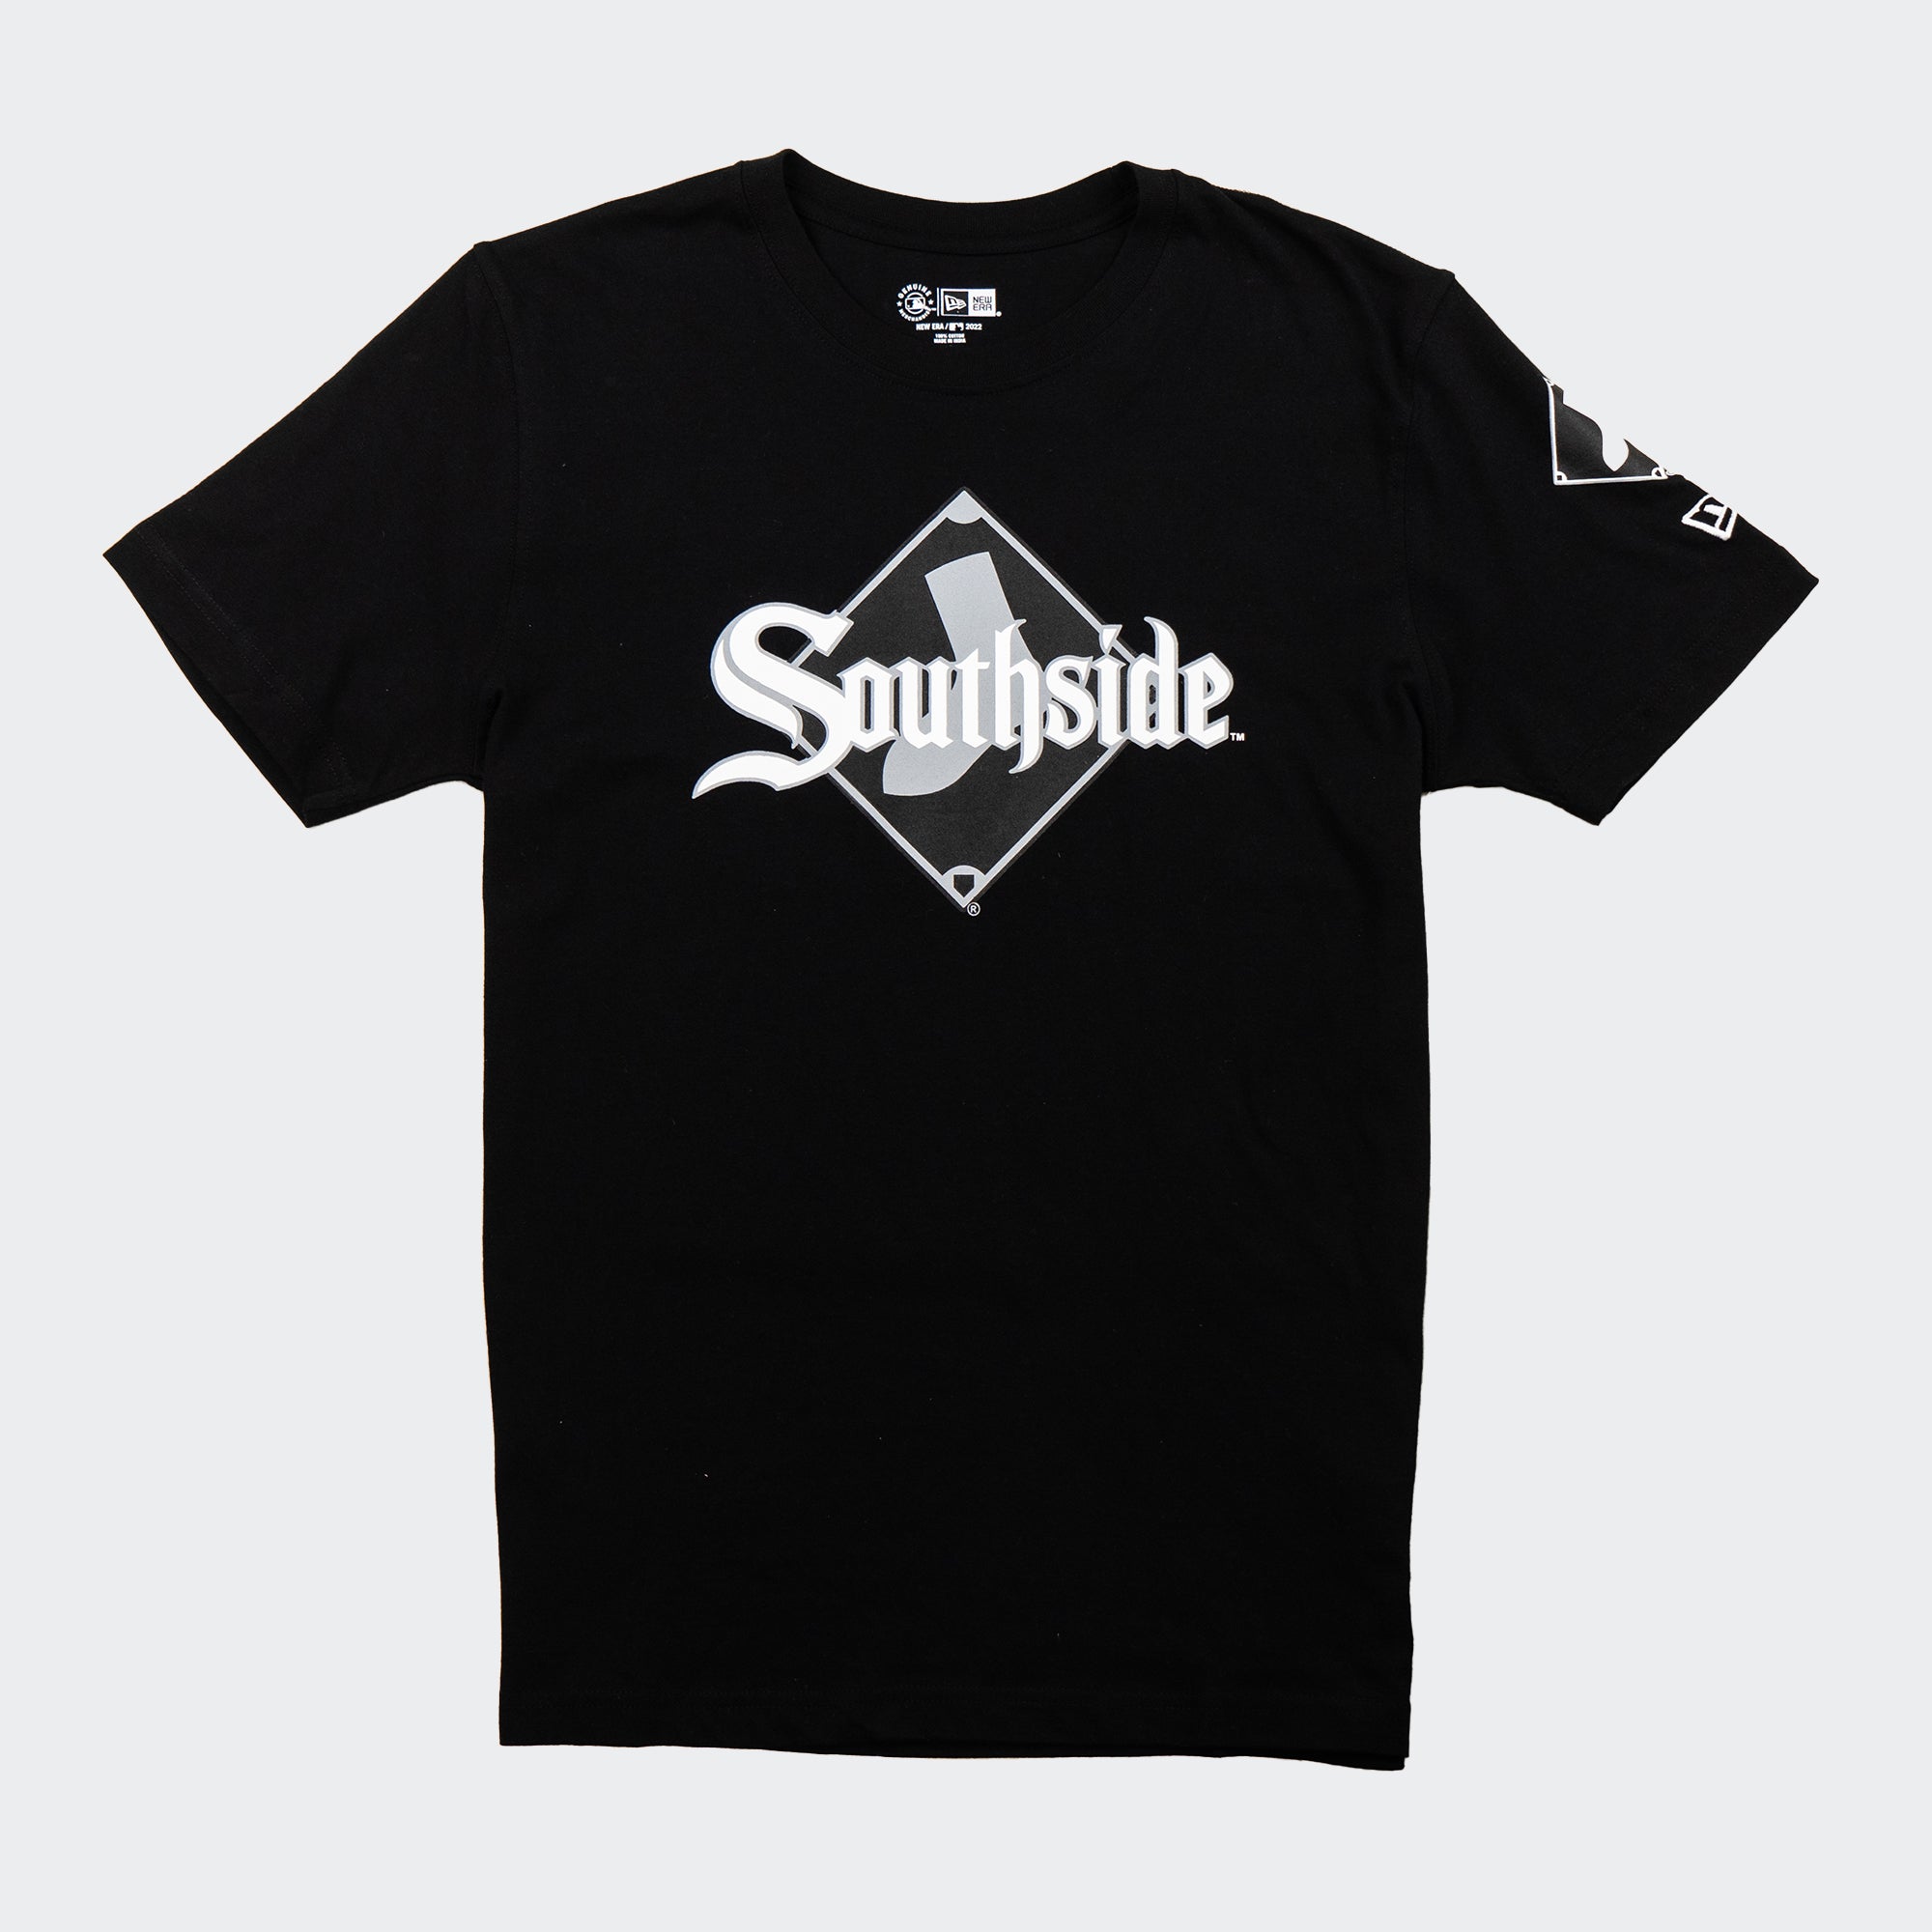 Chicago White Sox City Connect Southside T-Shirt